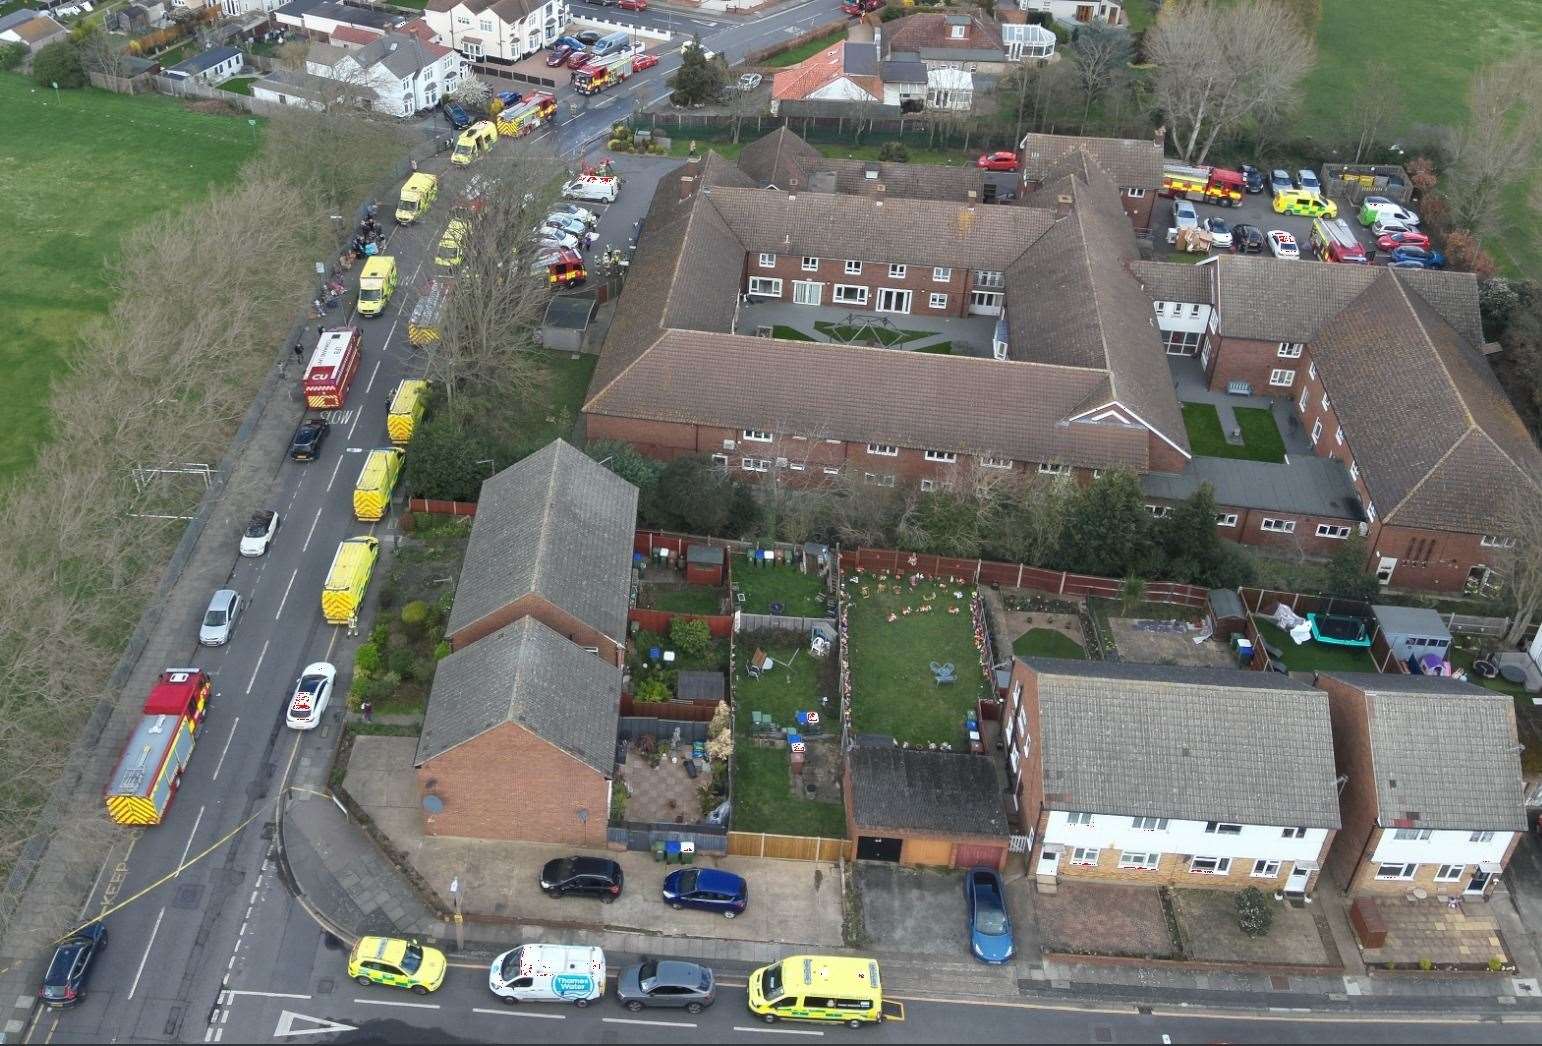 Four people were evacuated from the care home by emergency services. Picture: UKNIP